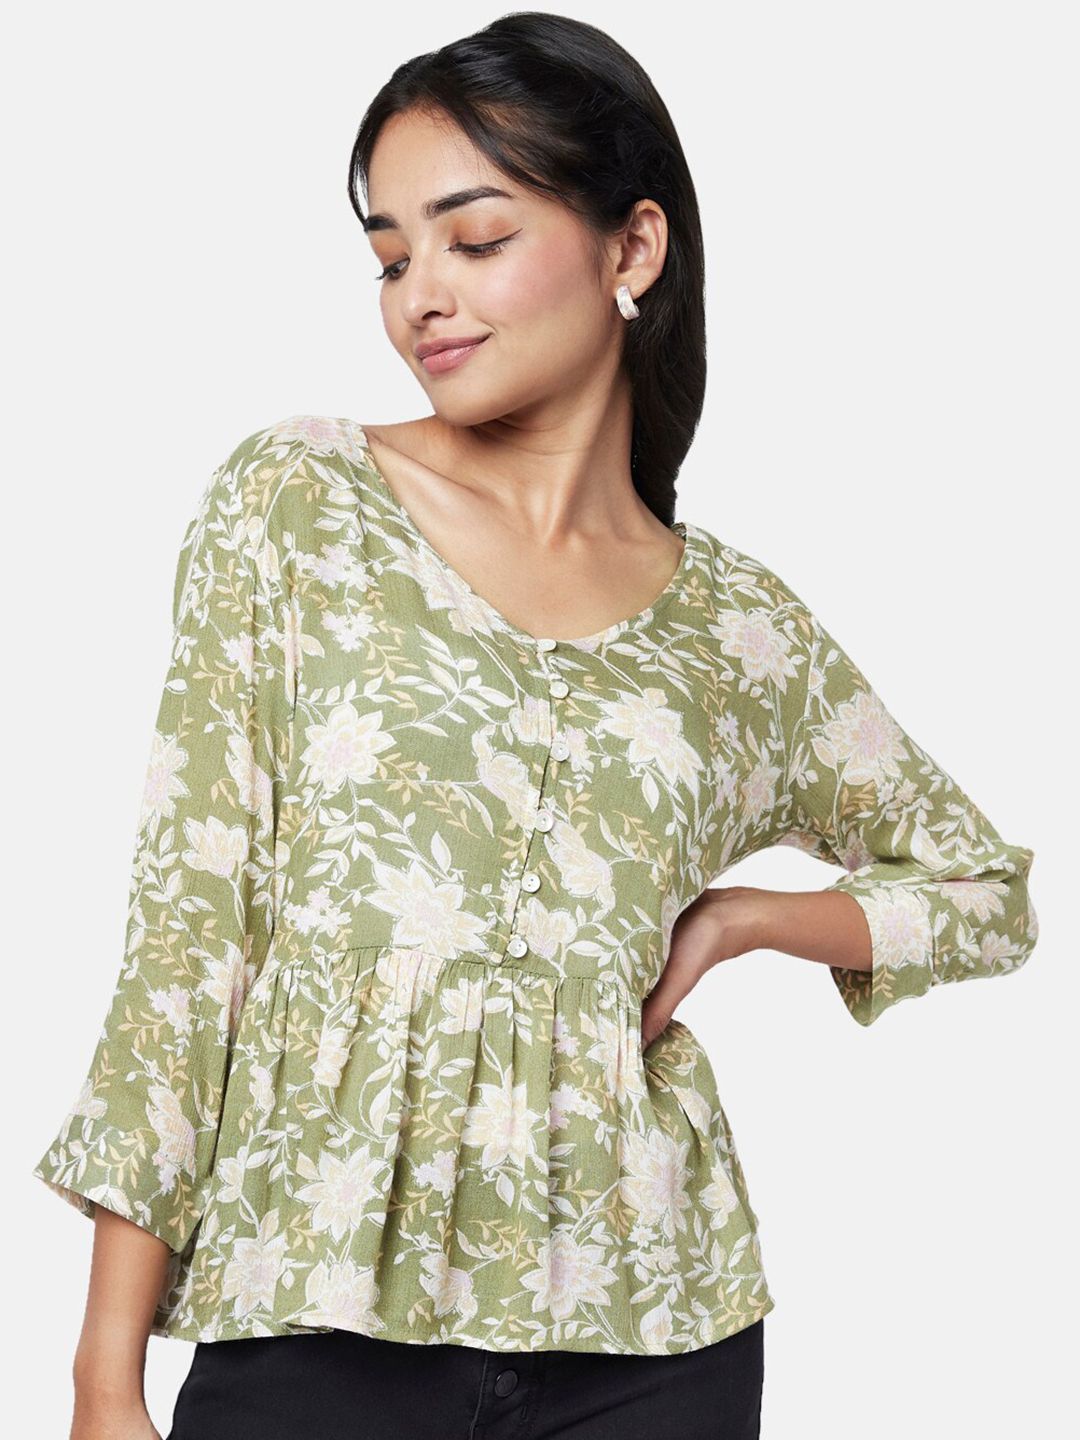 YU by Pantaloons Floral Printed Round Neck Top Price in India